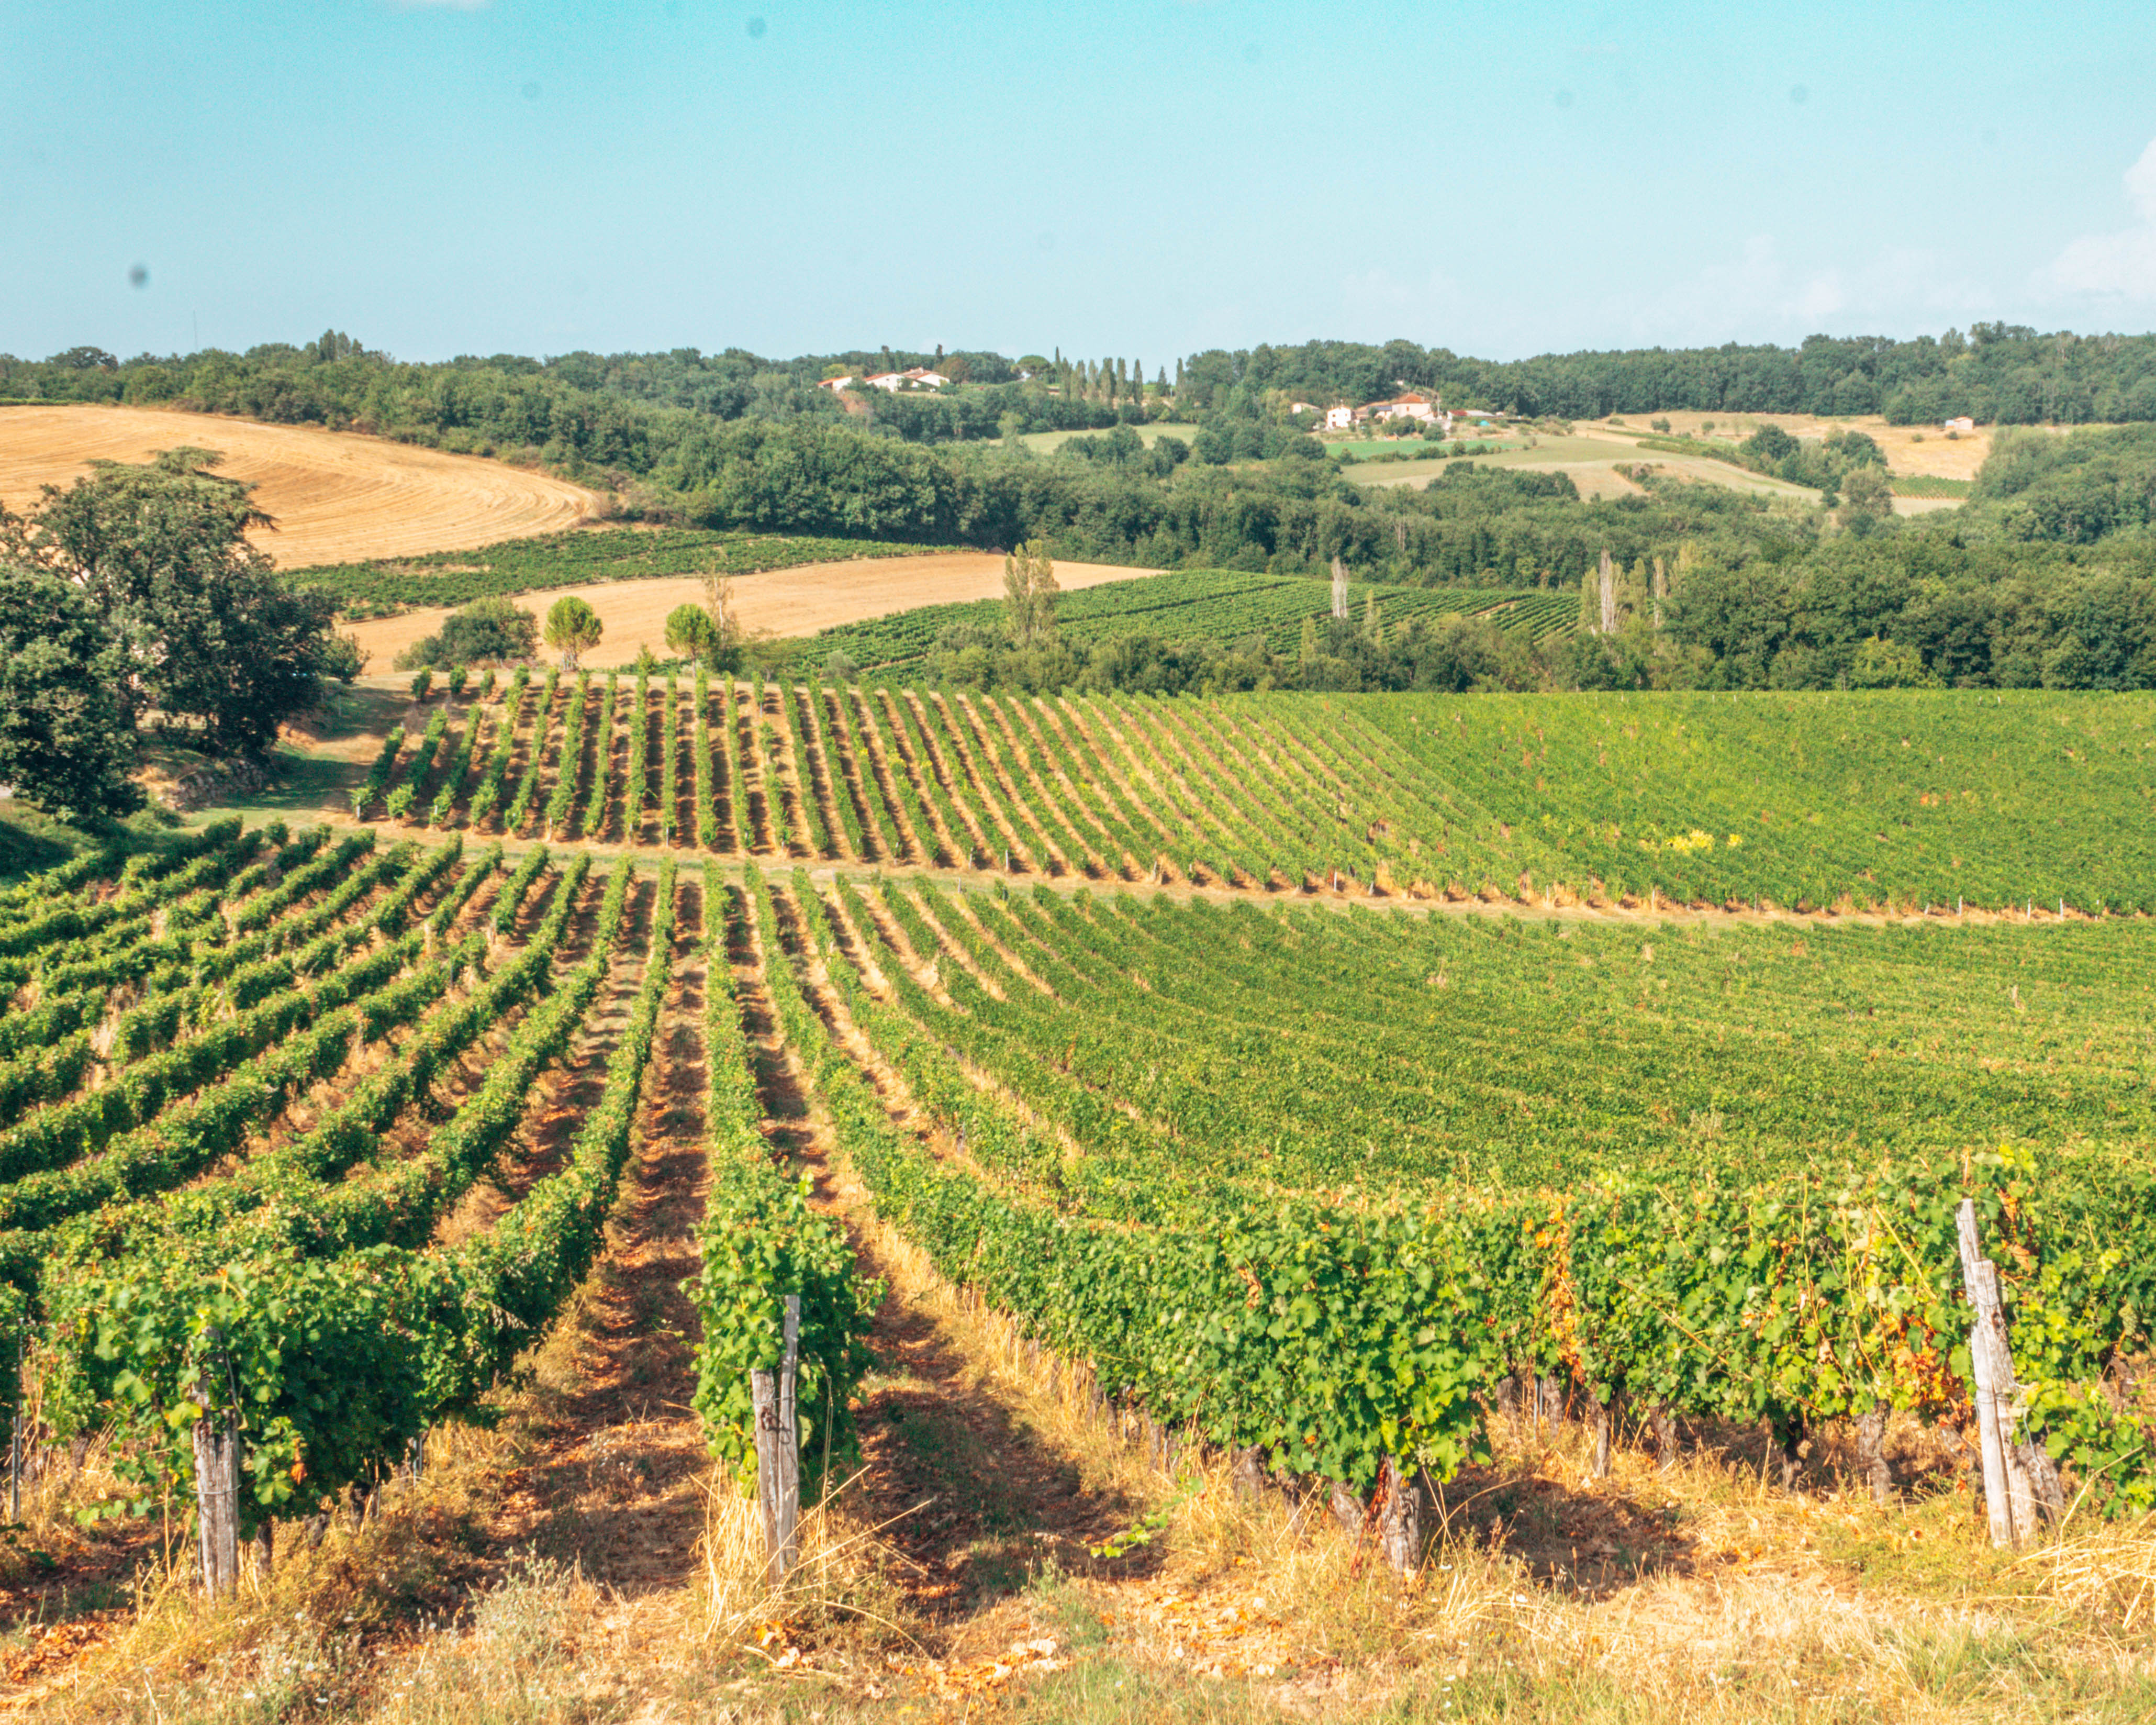 Vineyard in Gaillac France rolling hills